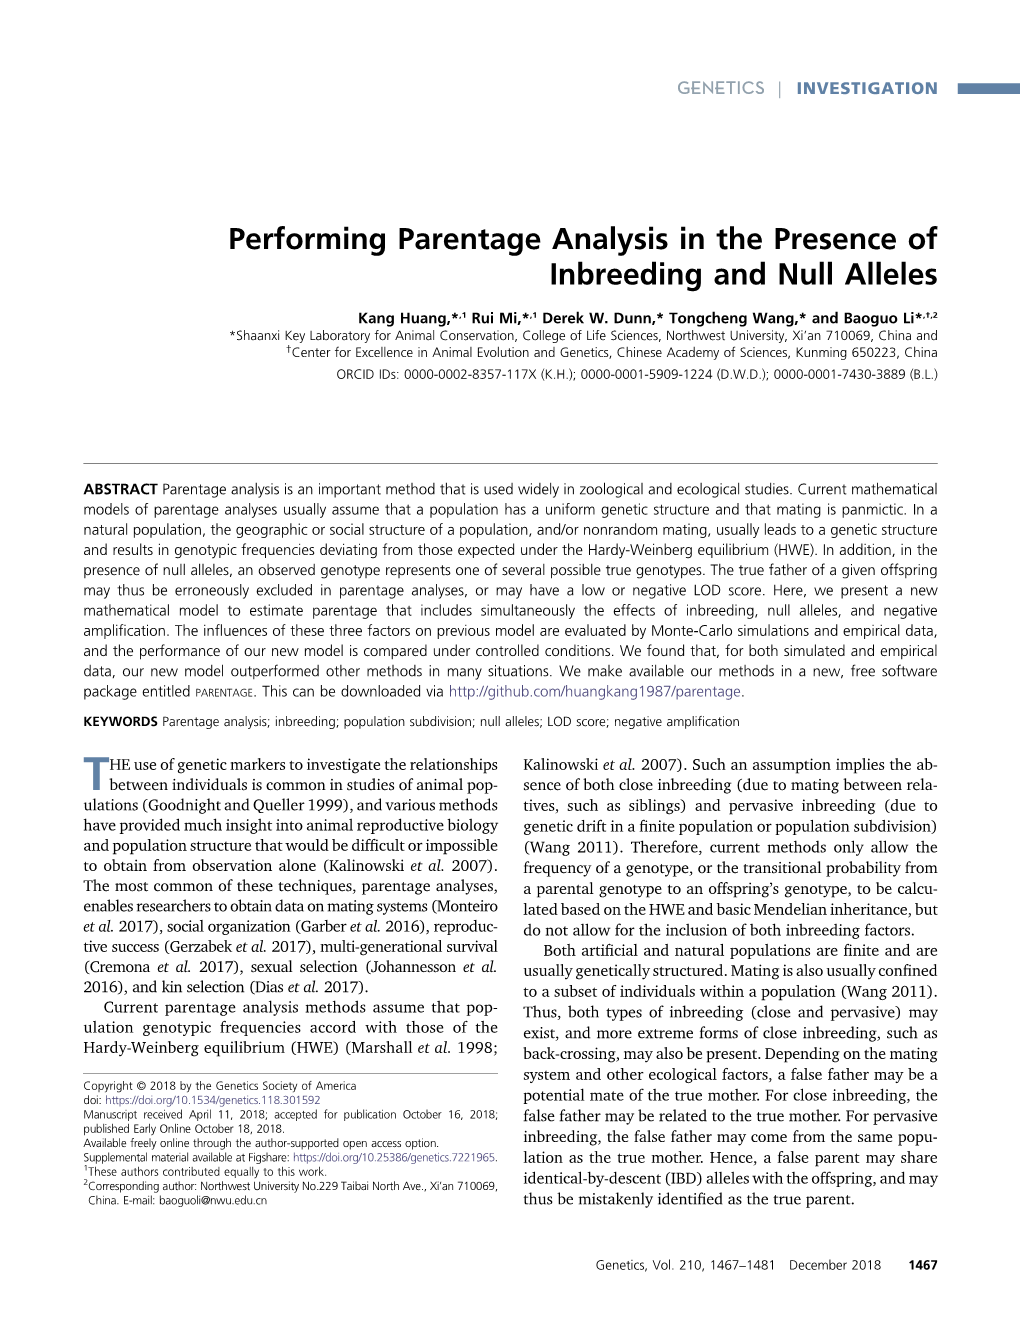 Performing Parentage Analysis in the Presence of Inbreeding and Null Alleles